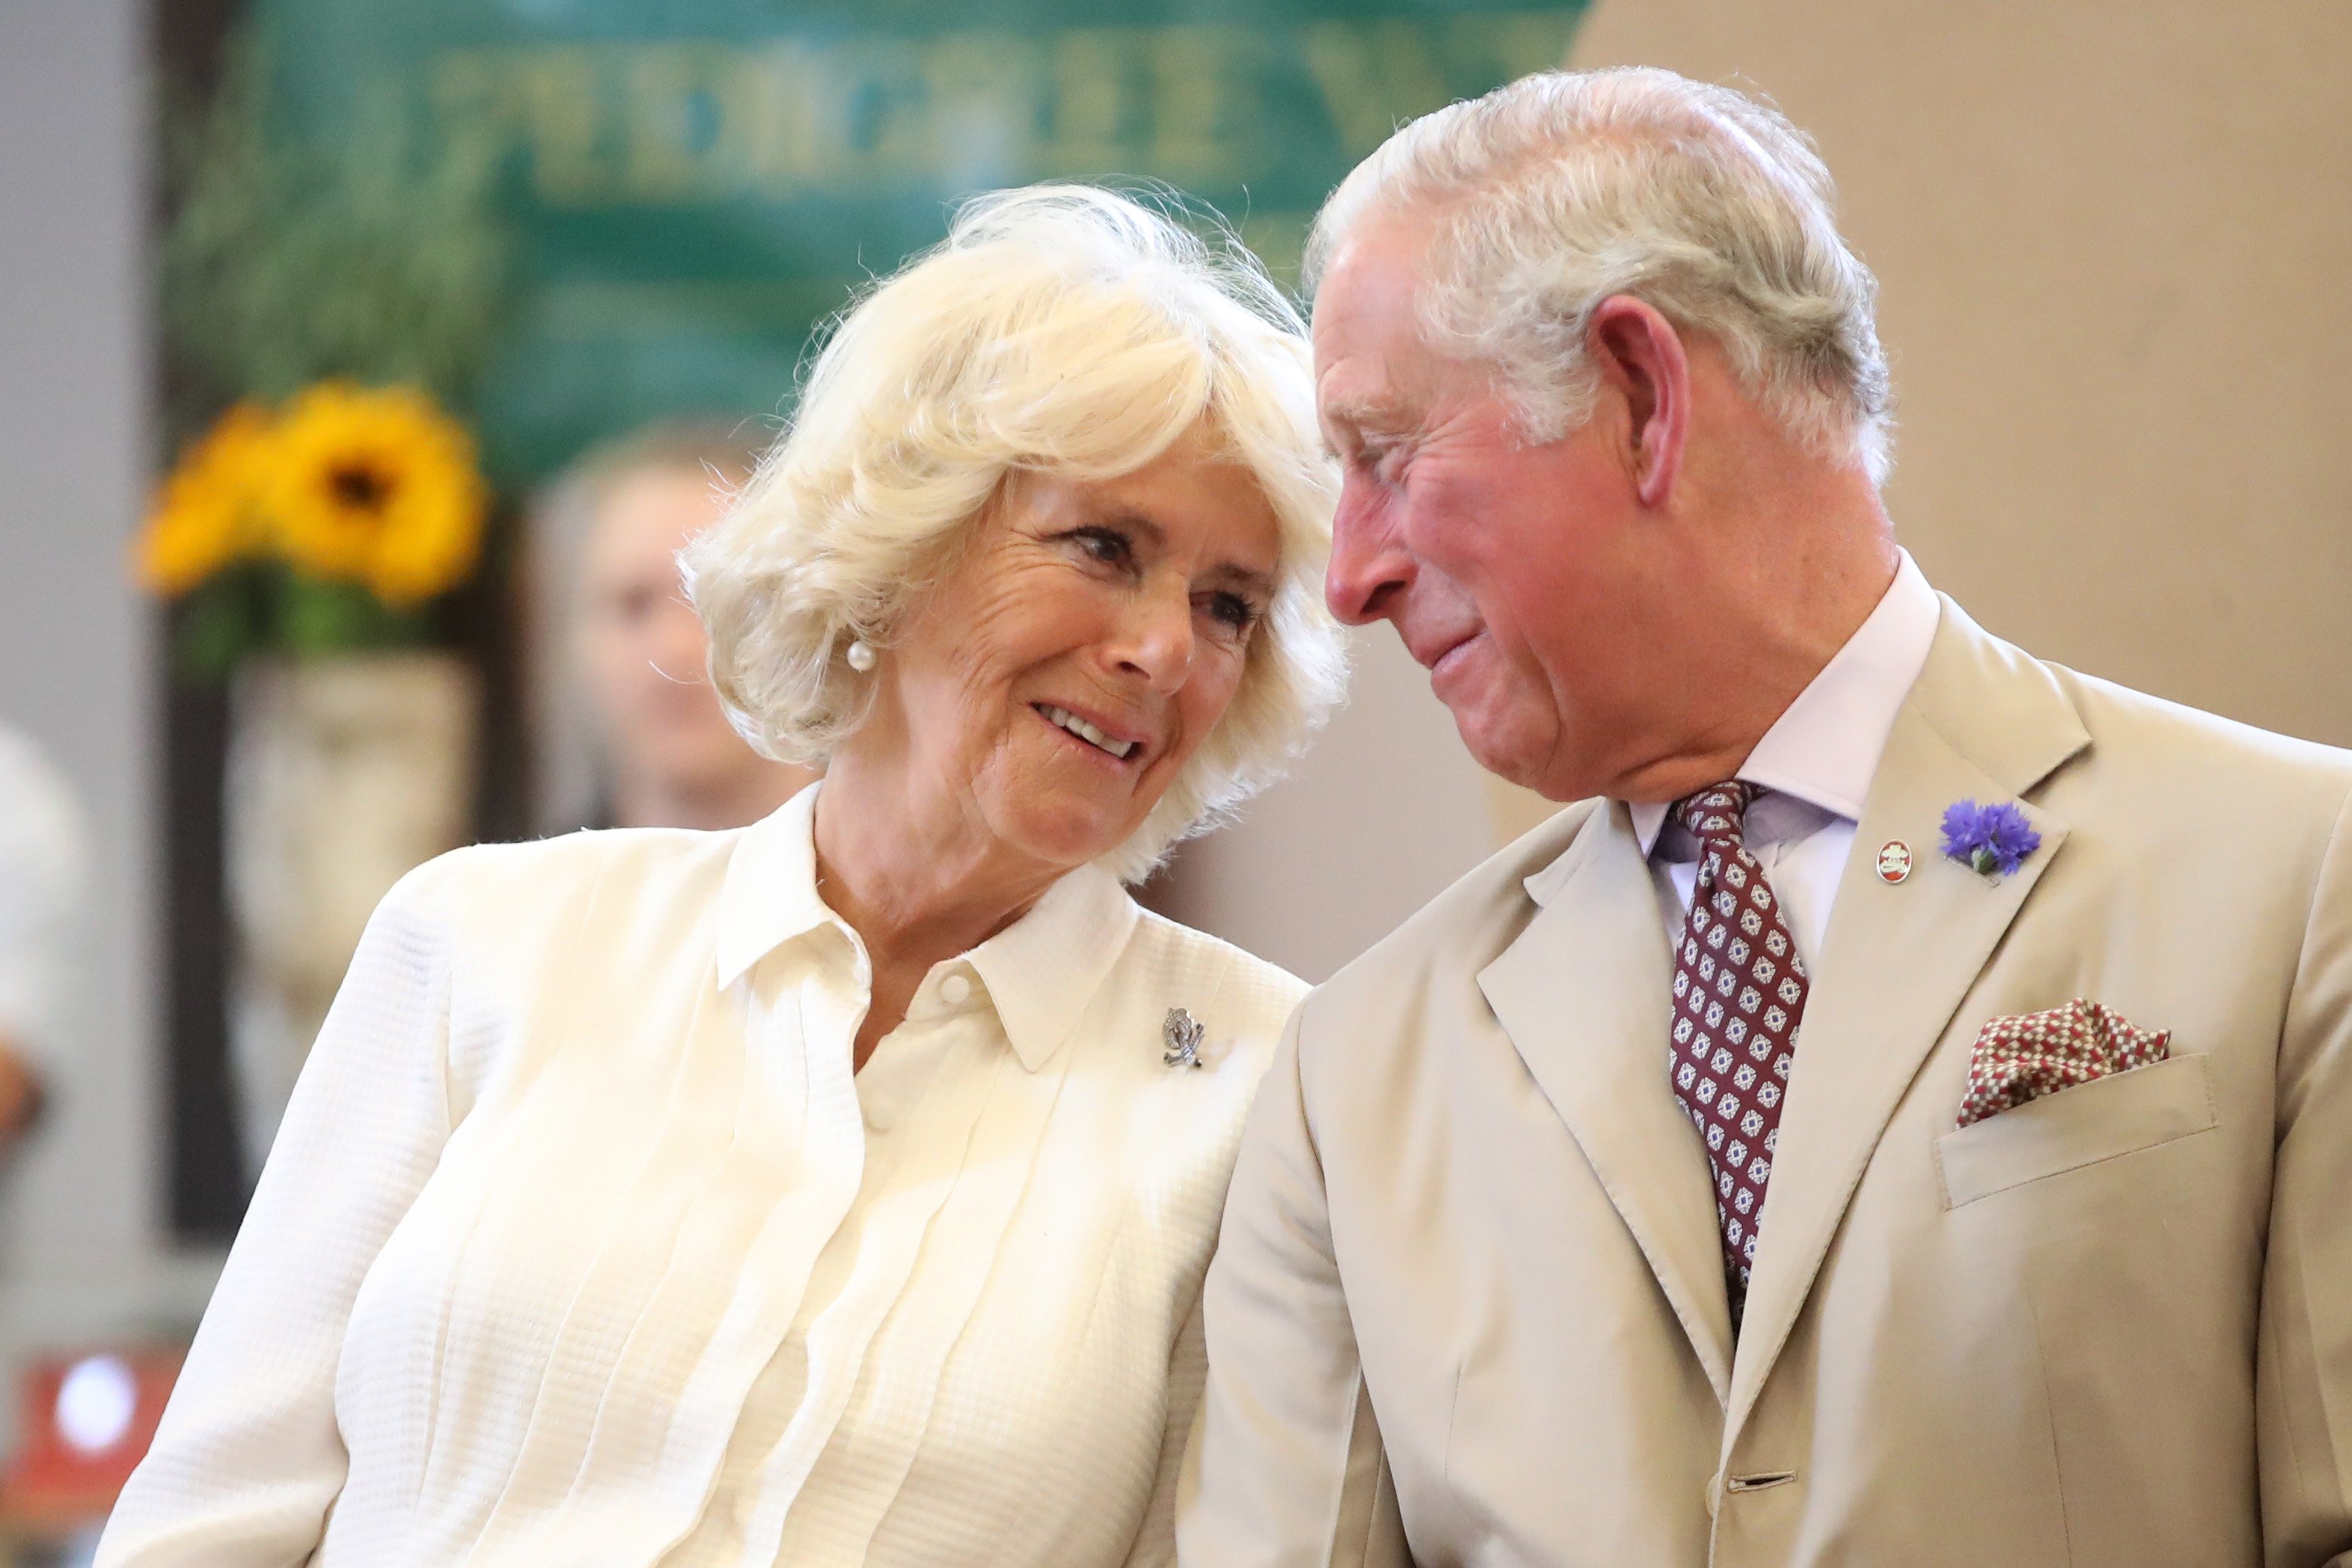 Prince Charles and Camilla at the newly-renovated Edwardian community hall, The Strand Hall, during their third day visiting Wales on July 4, 2018, in Builth Wells, Wales | Source: Getty Images